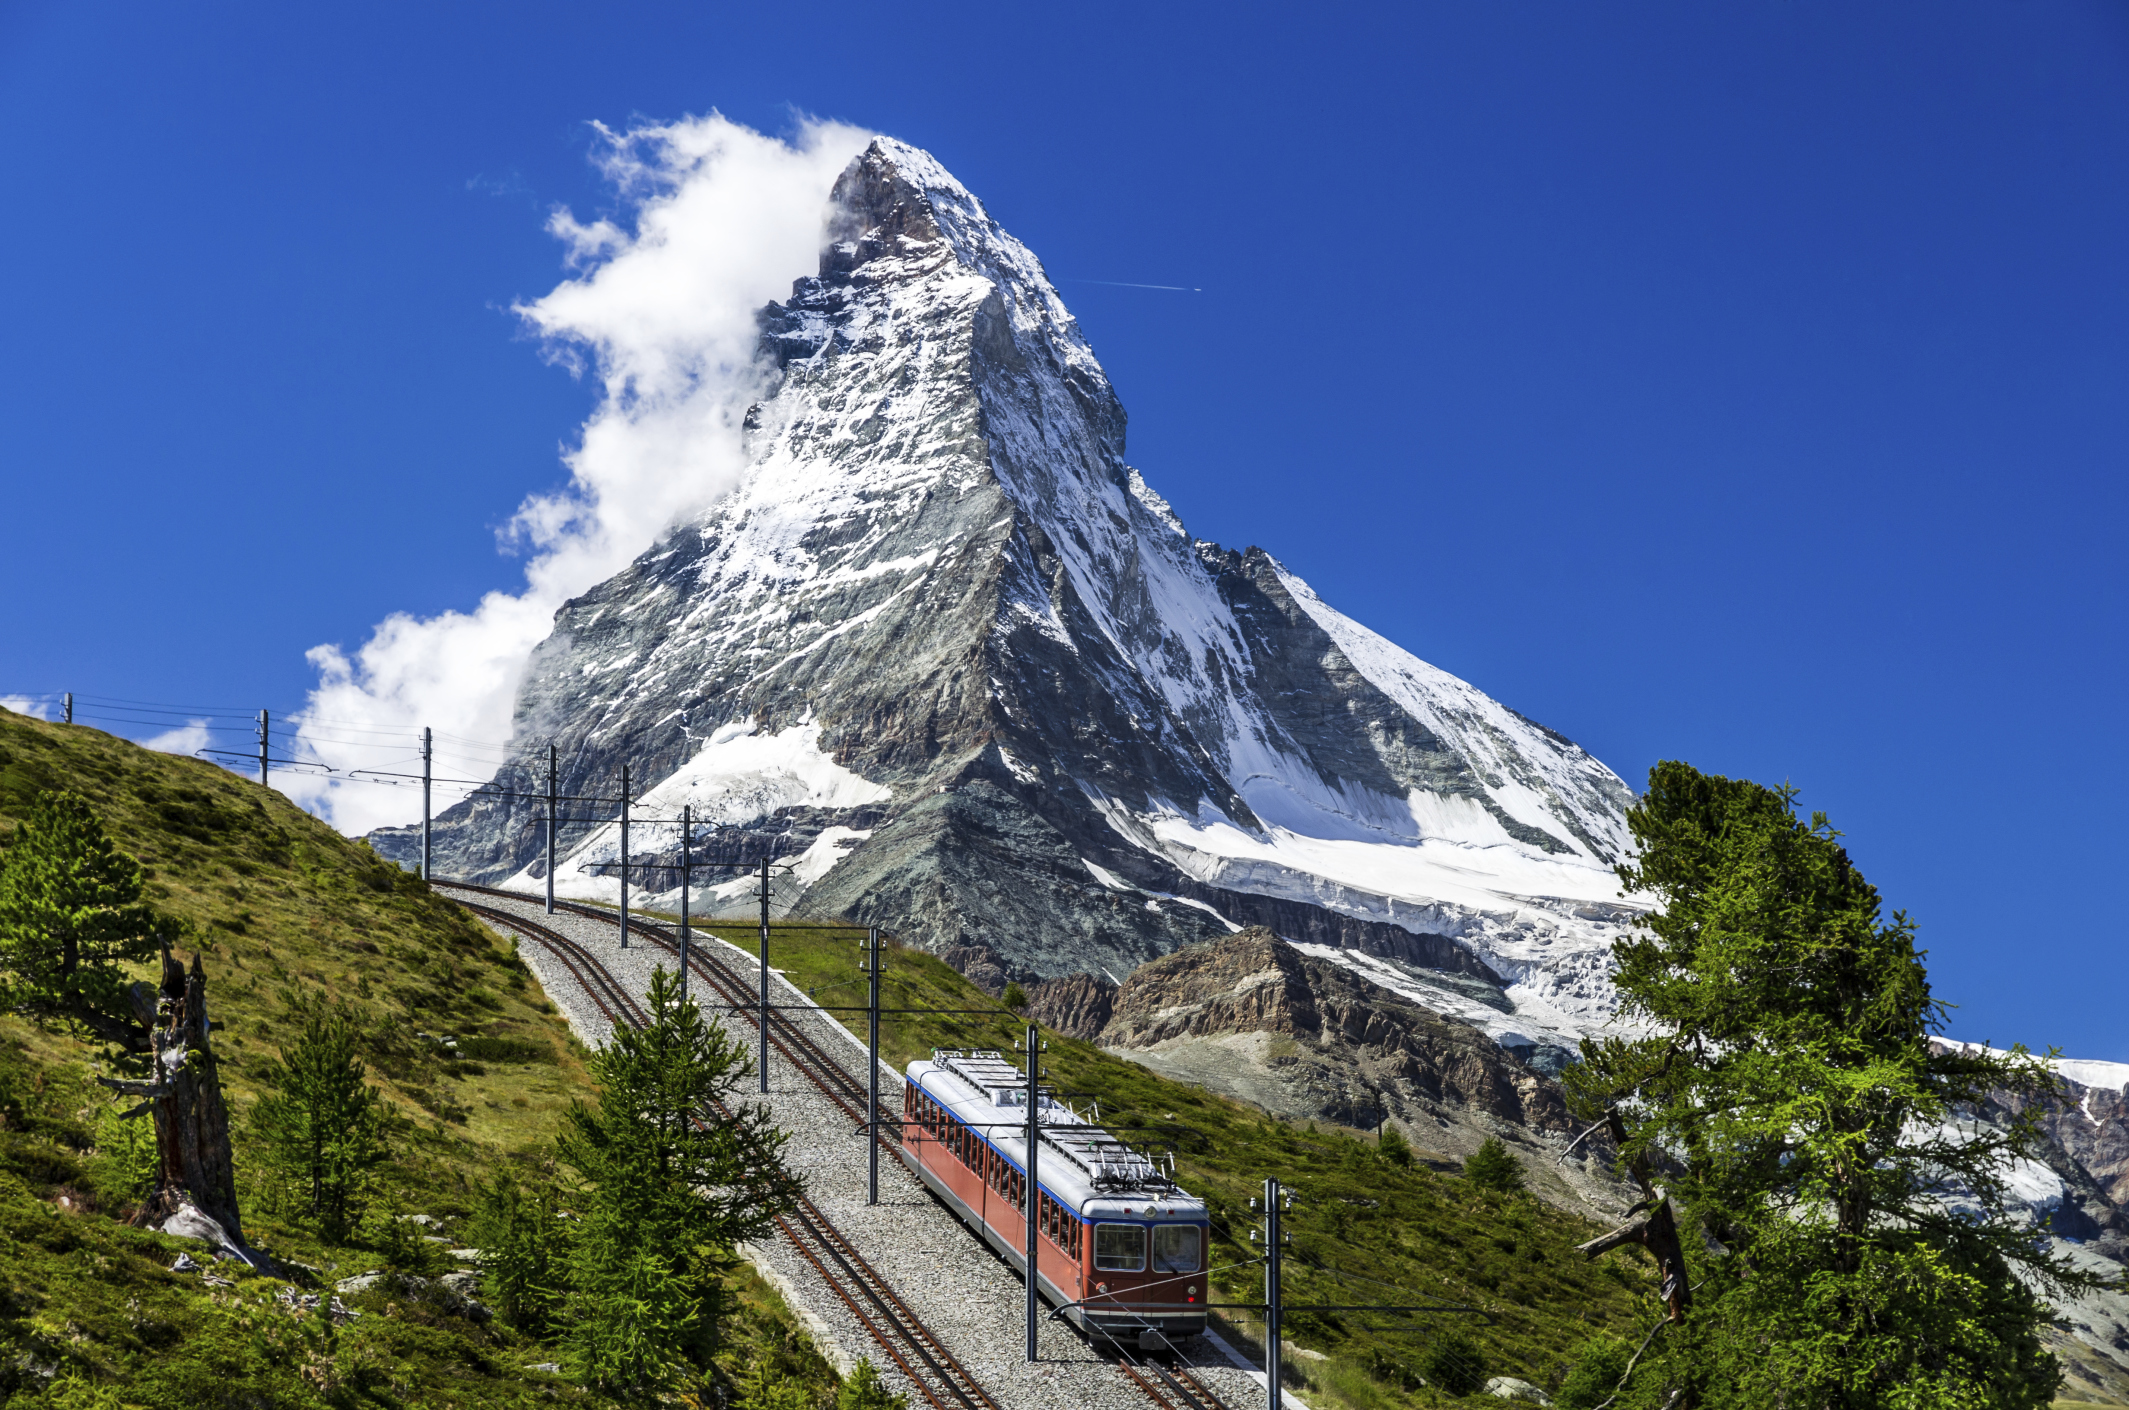 Travel through Europe with a Eurail pass